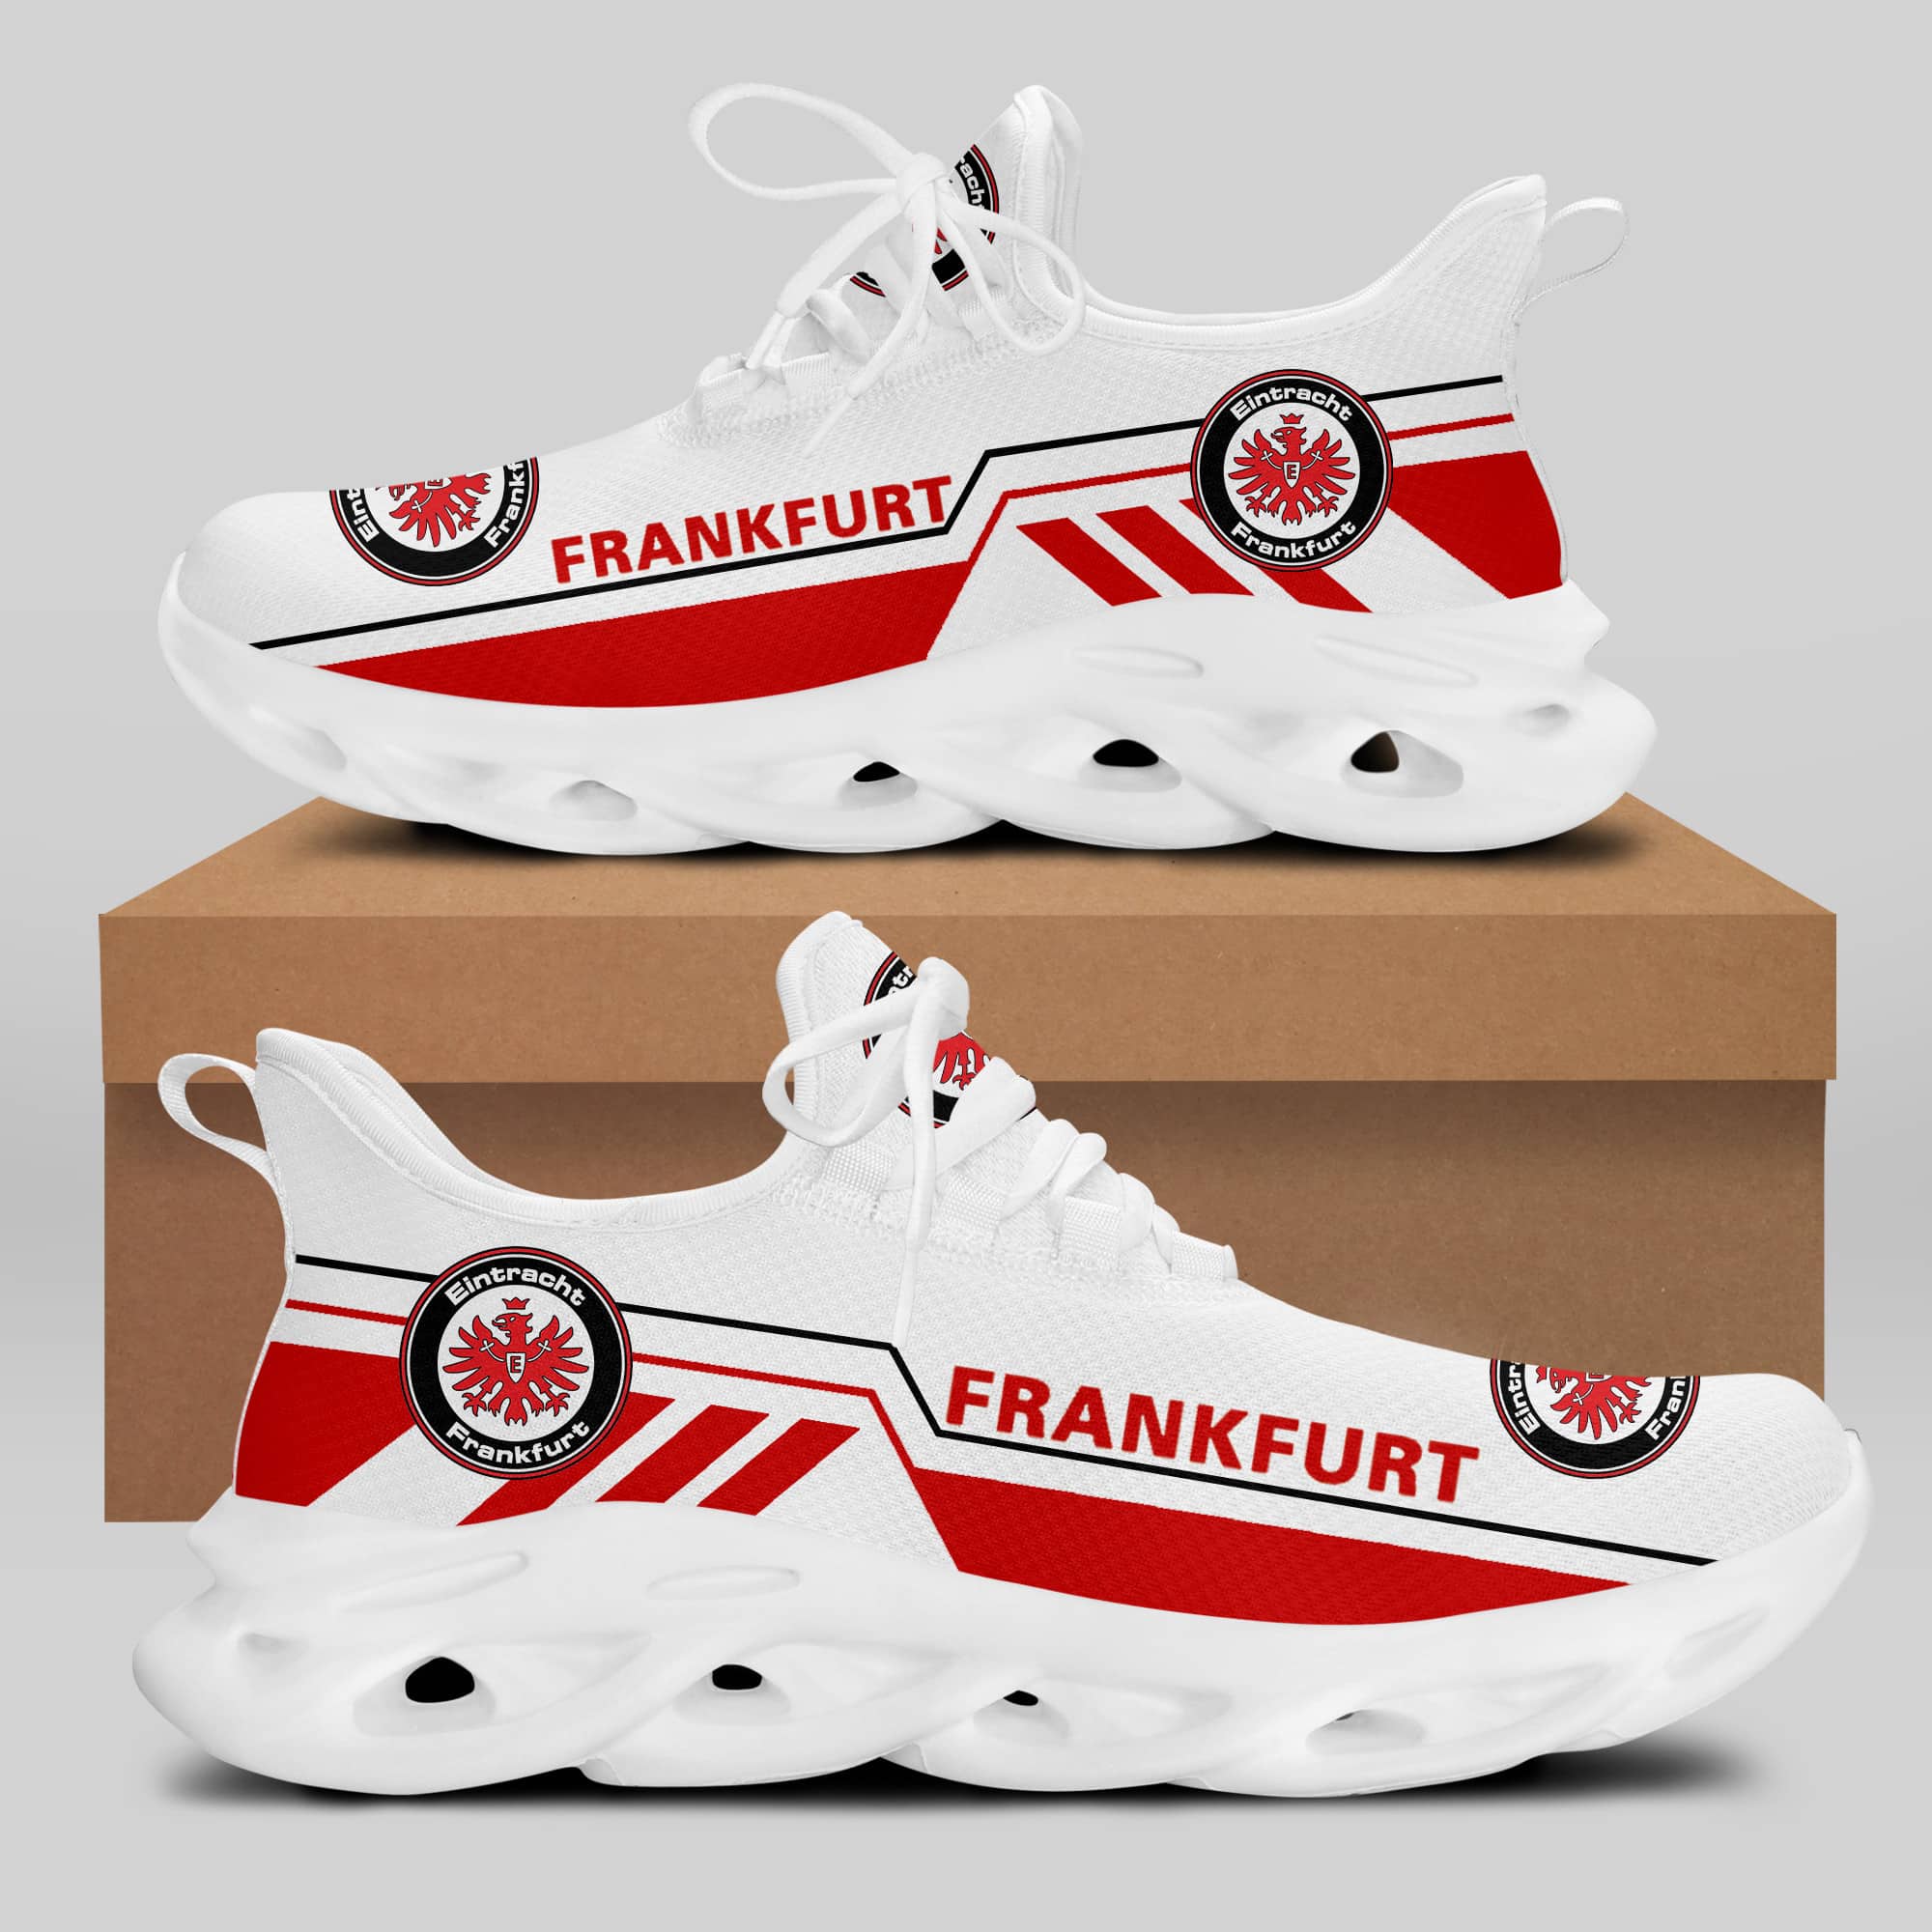 Eintracht Frankfurt Running Shoes Max Soul Shoes Sneakers Ver 14 1